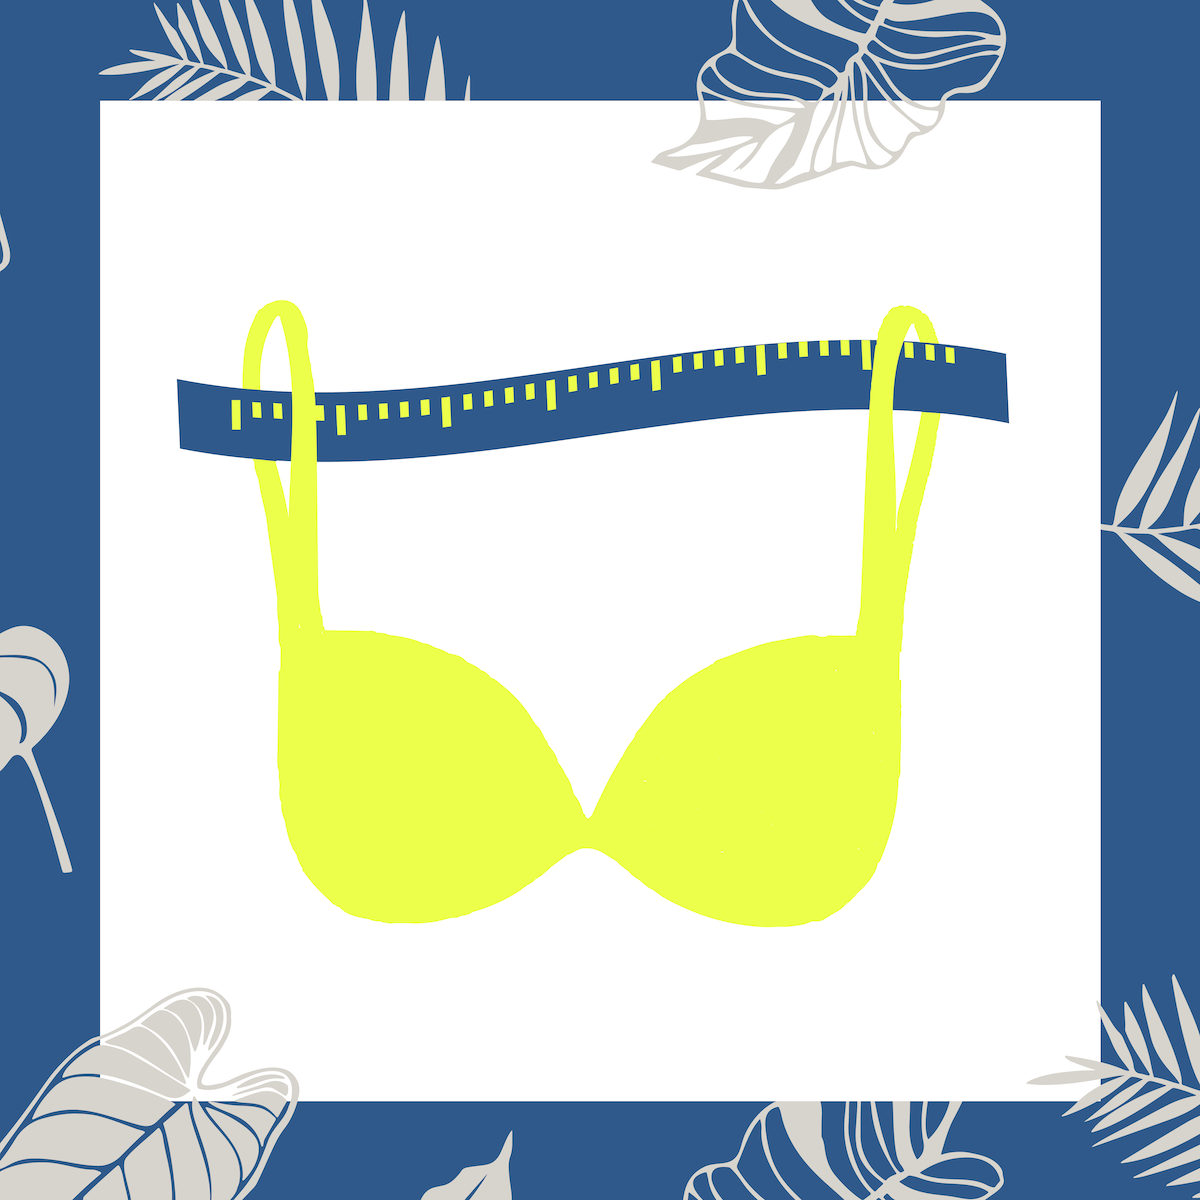 How to Measure Your Bra Size at Home